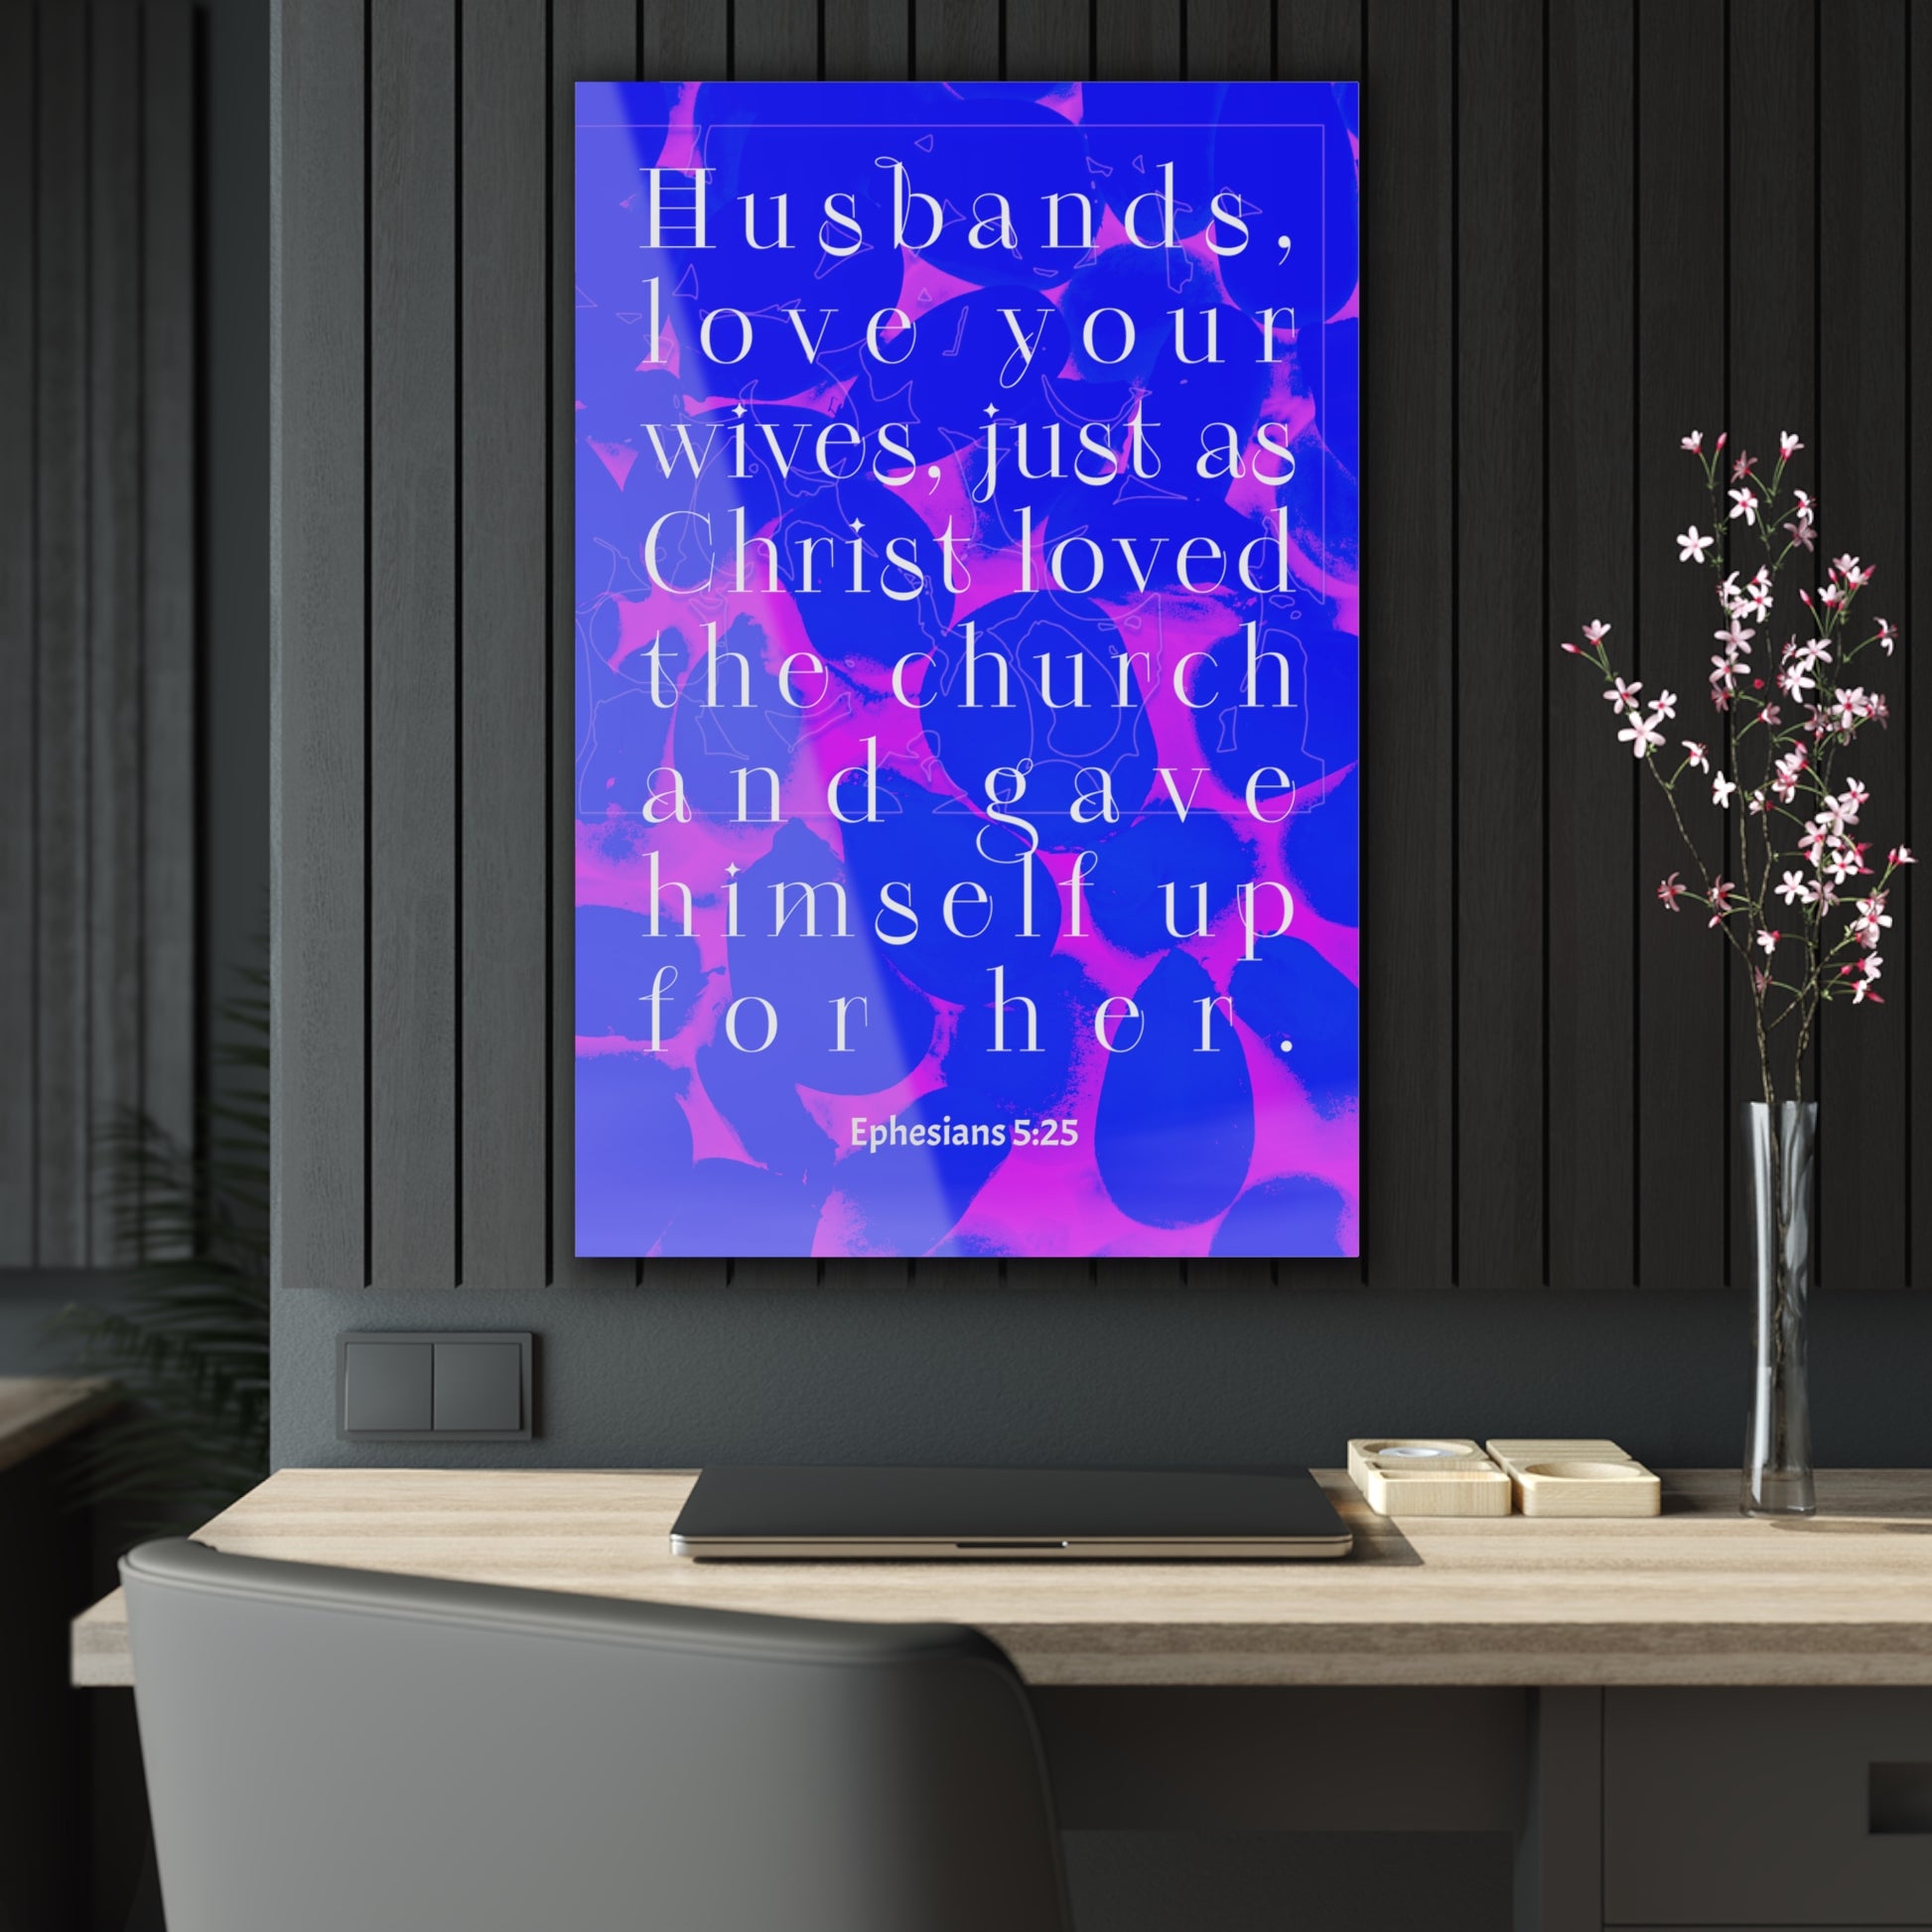 Religious Art Painting - Glass Art Picture "Husbands Love Your Wives" | Art & Wall Decor,Assembled in the USA,Assembled in USA,Decor,Home & Living,Home Decor,Indoor,Made in the USA,Made in USA,Poster